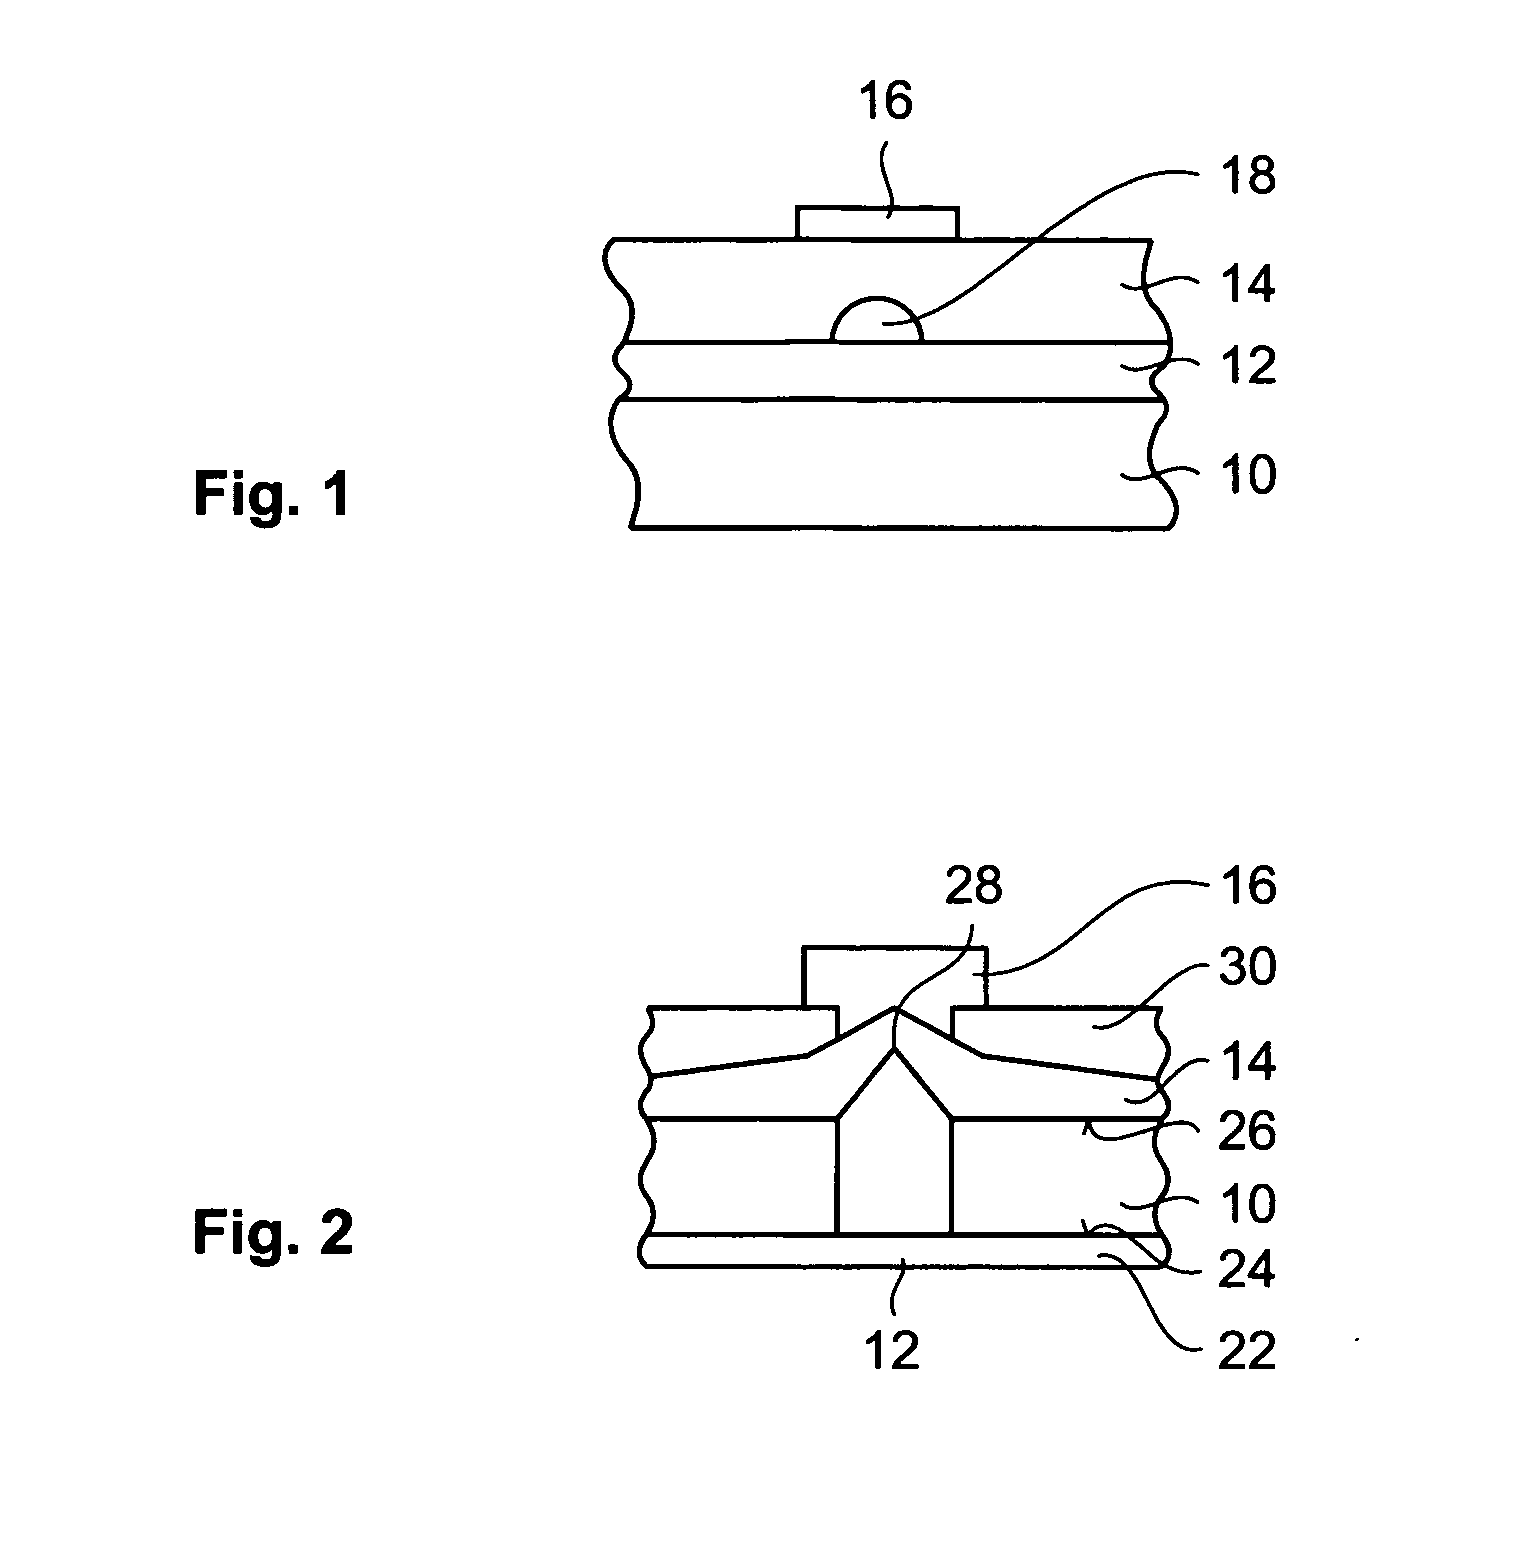 Resistor with improved switchable resistance and non-volatile memory device